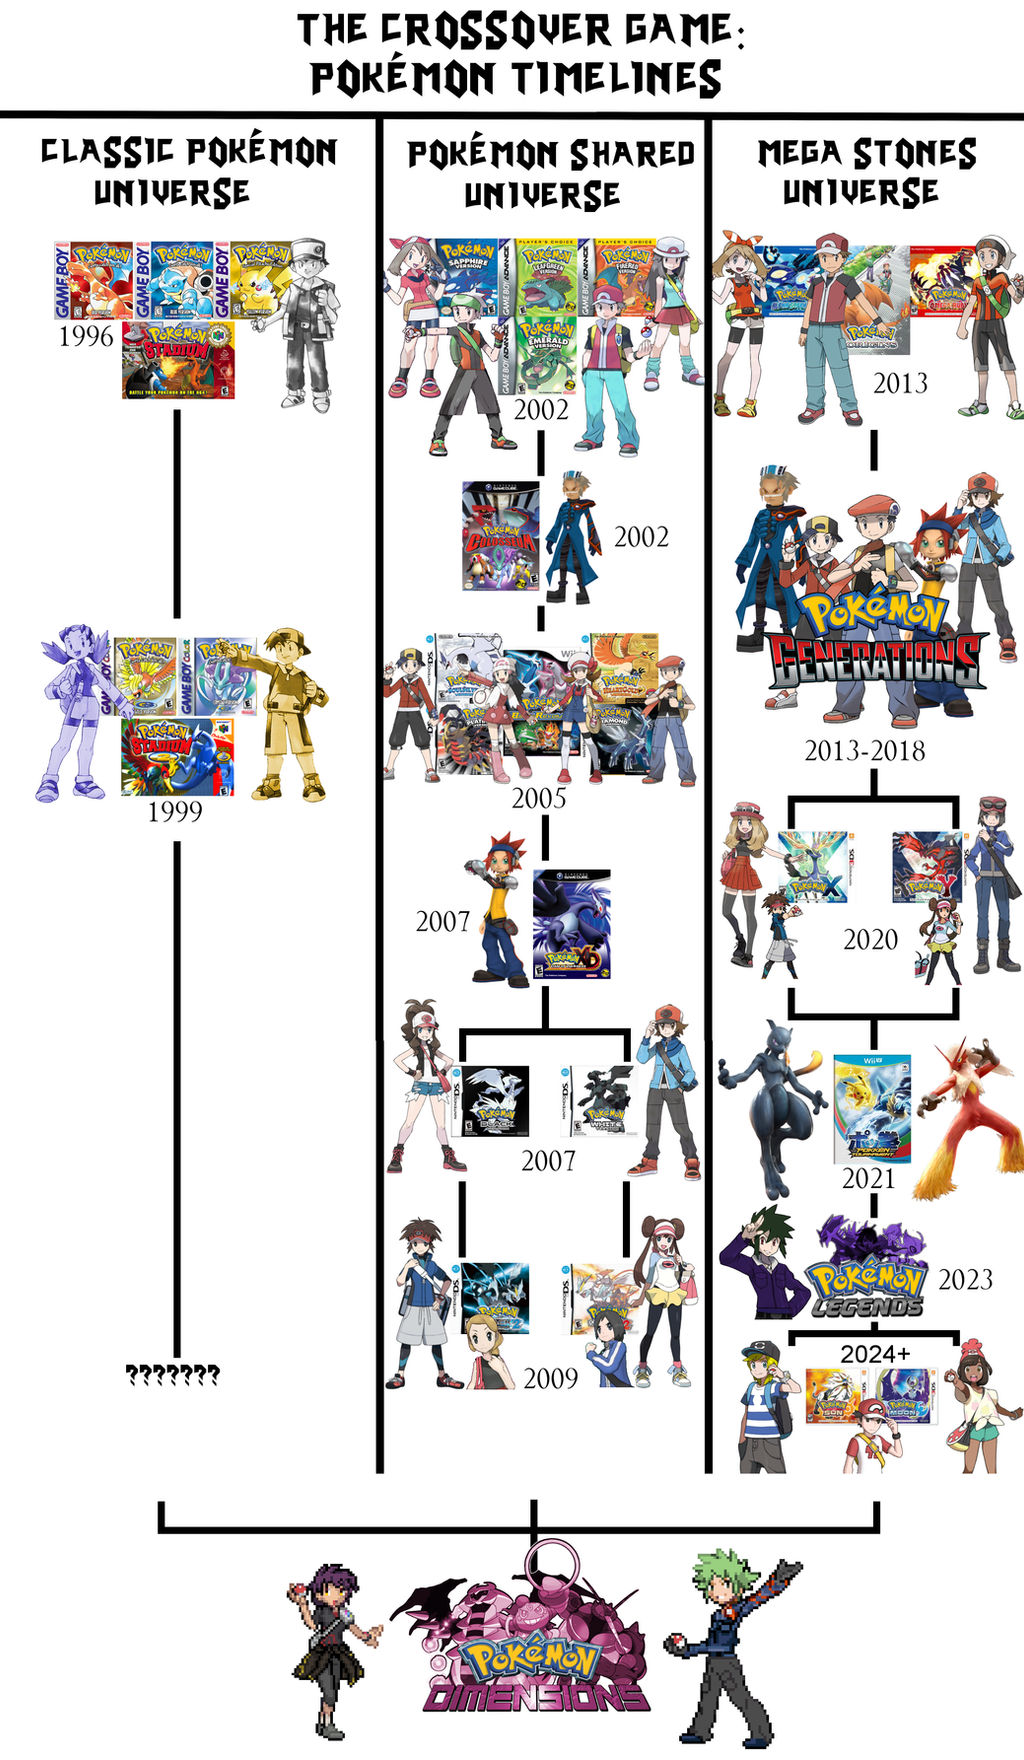 The Crossover Game Pokemon Timelines By Leehatake93 On Deviantart